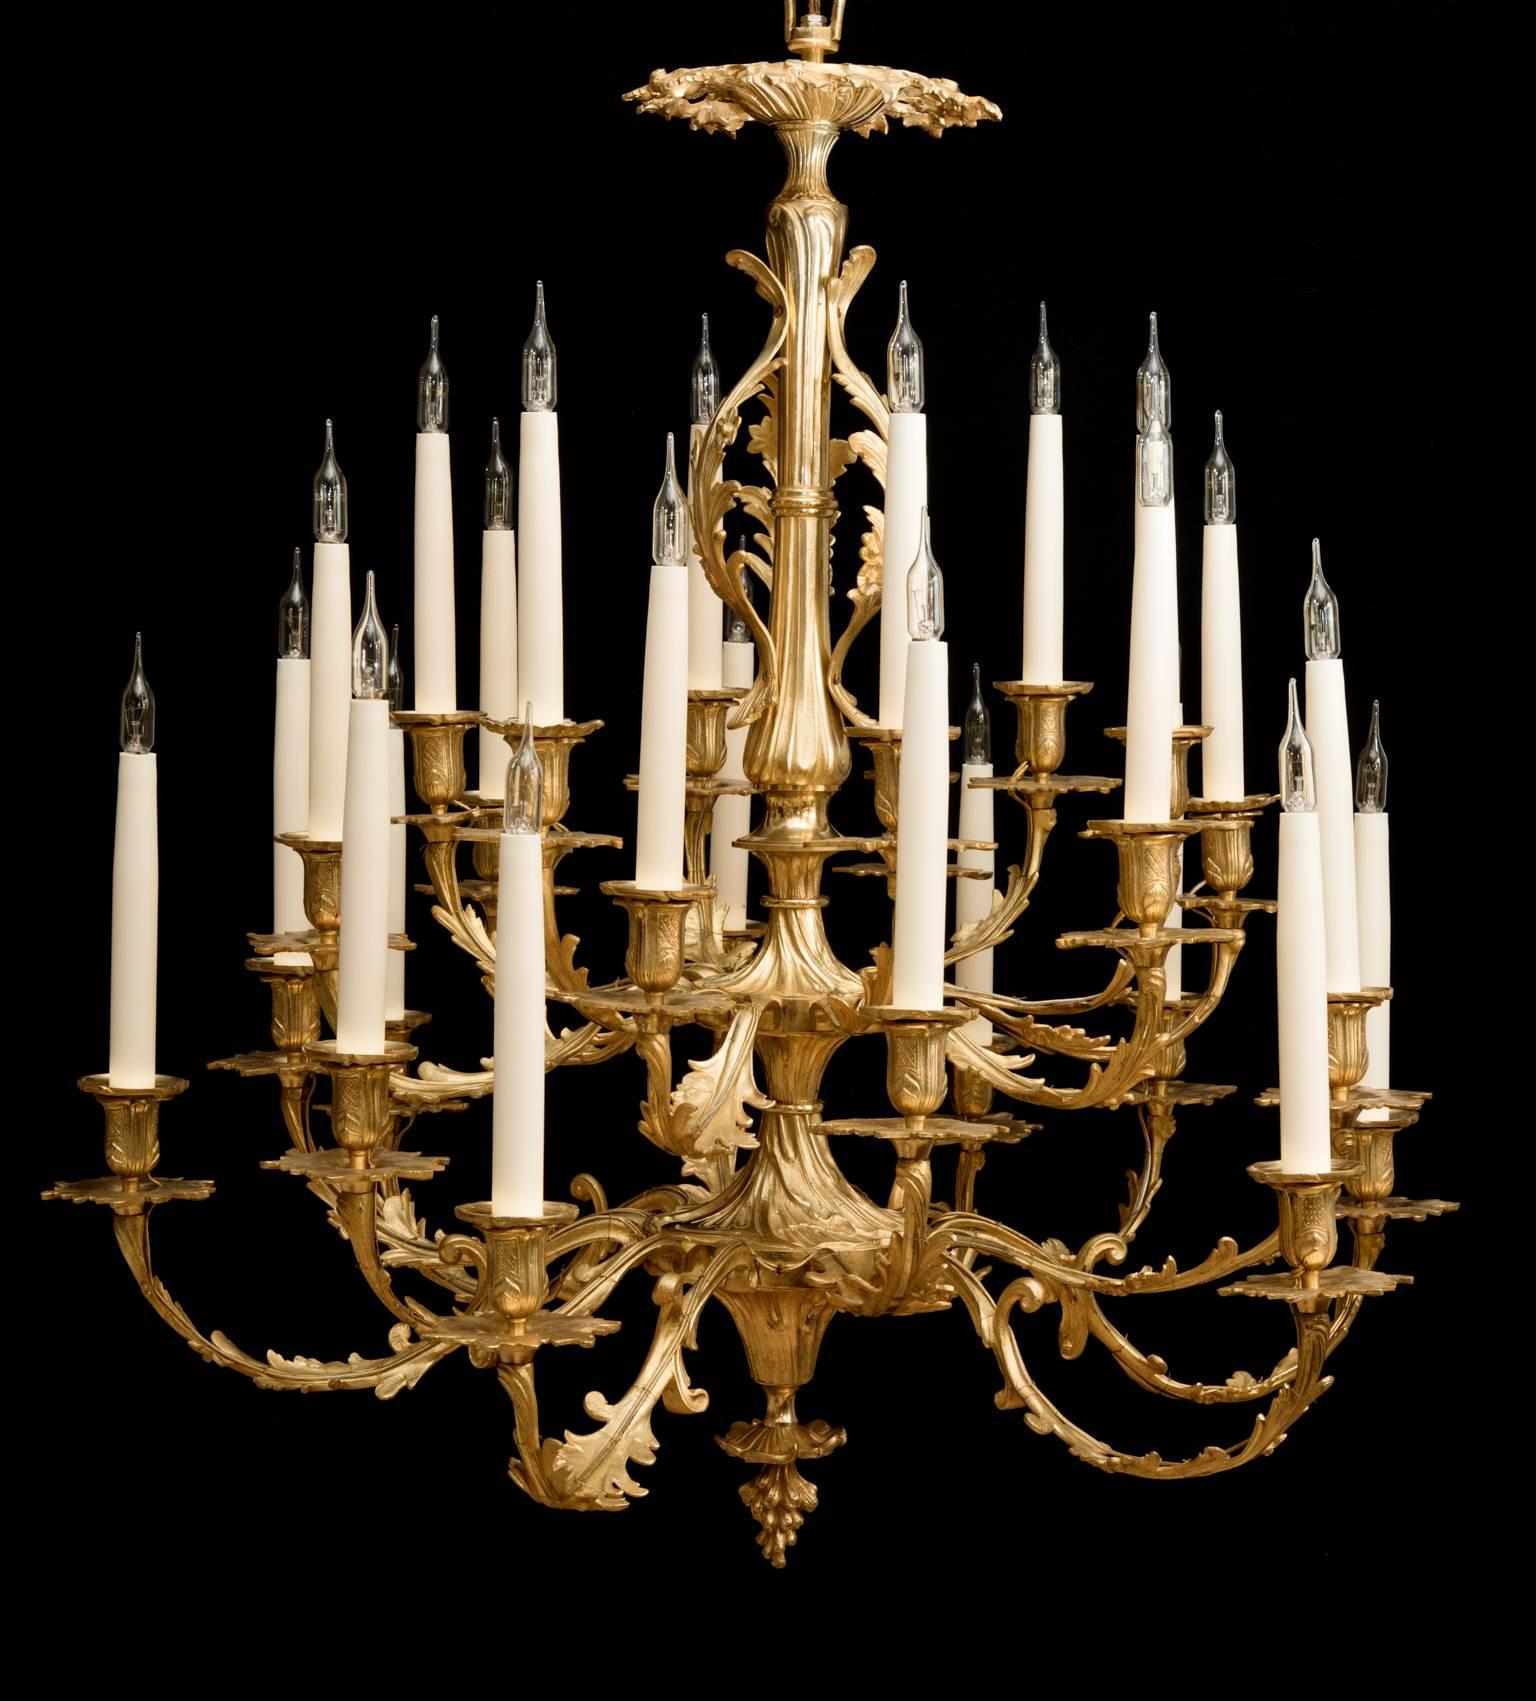 With 24 French candles on finely cast and incised ornate tiered arms decorated with acanthus leaves. Extending from a central ornate rod with further leaves and Rococo curling shapes, terminating in a vine finial. 
Currently electrified for the UK